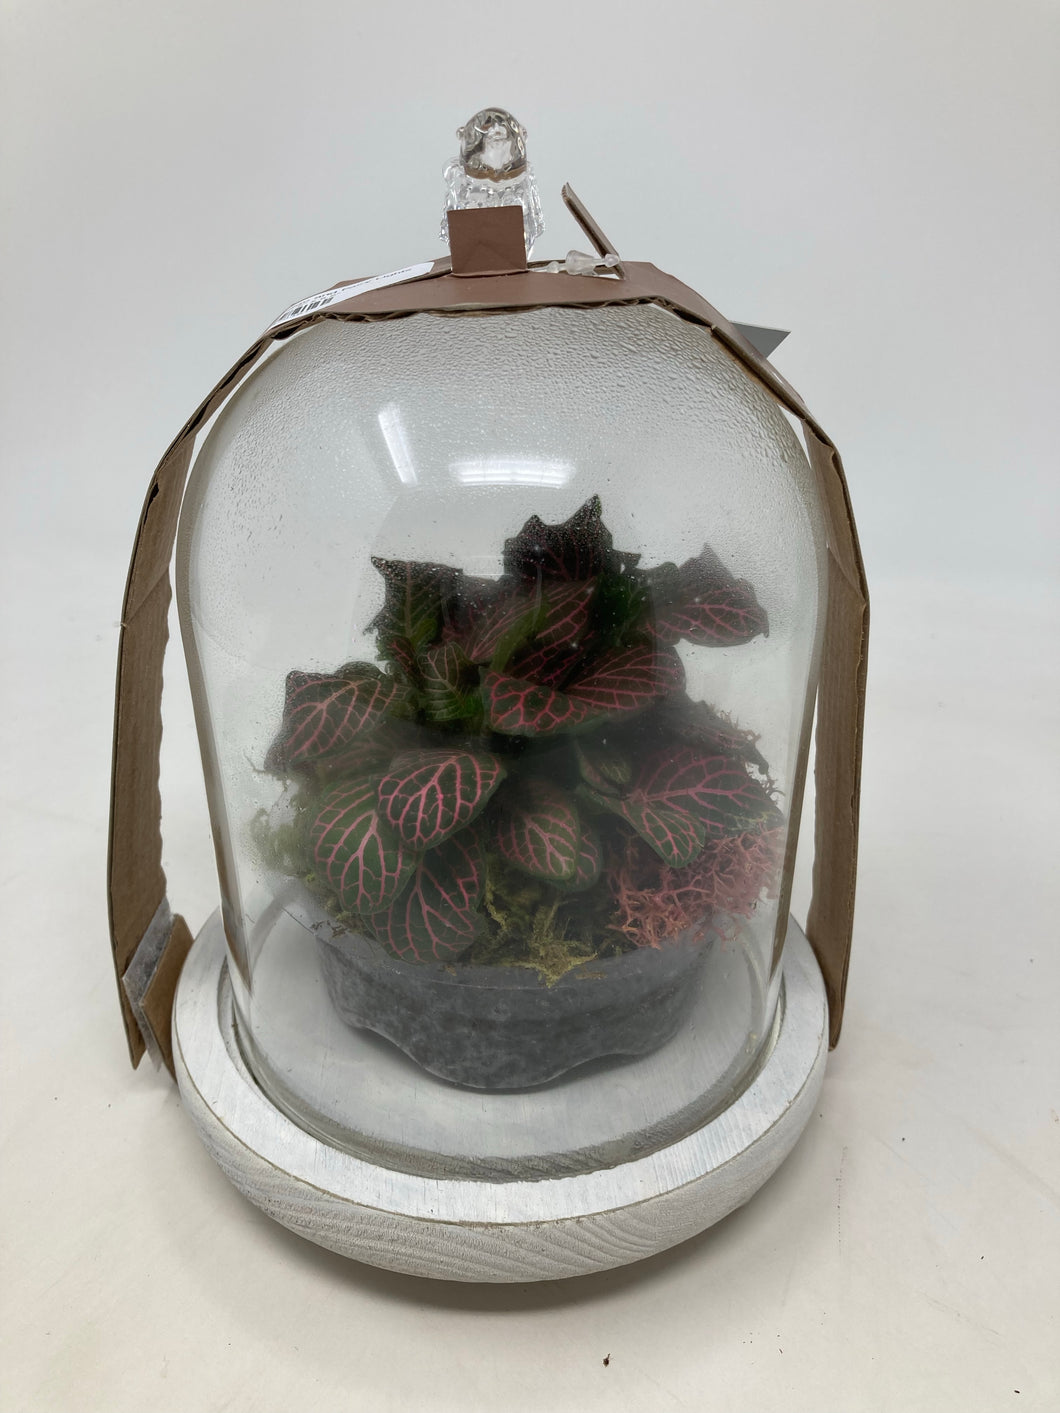 Terrarium with Foliage and Fairy Lights